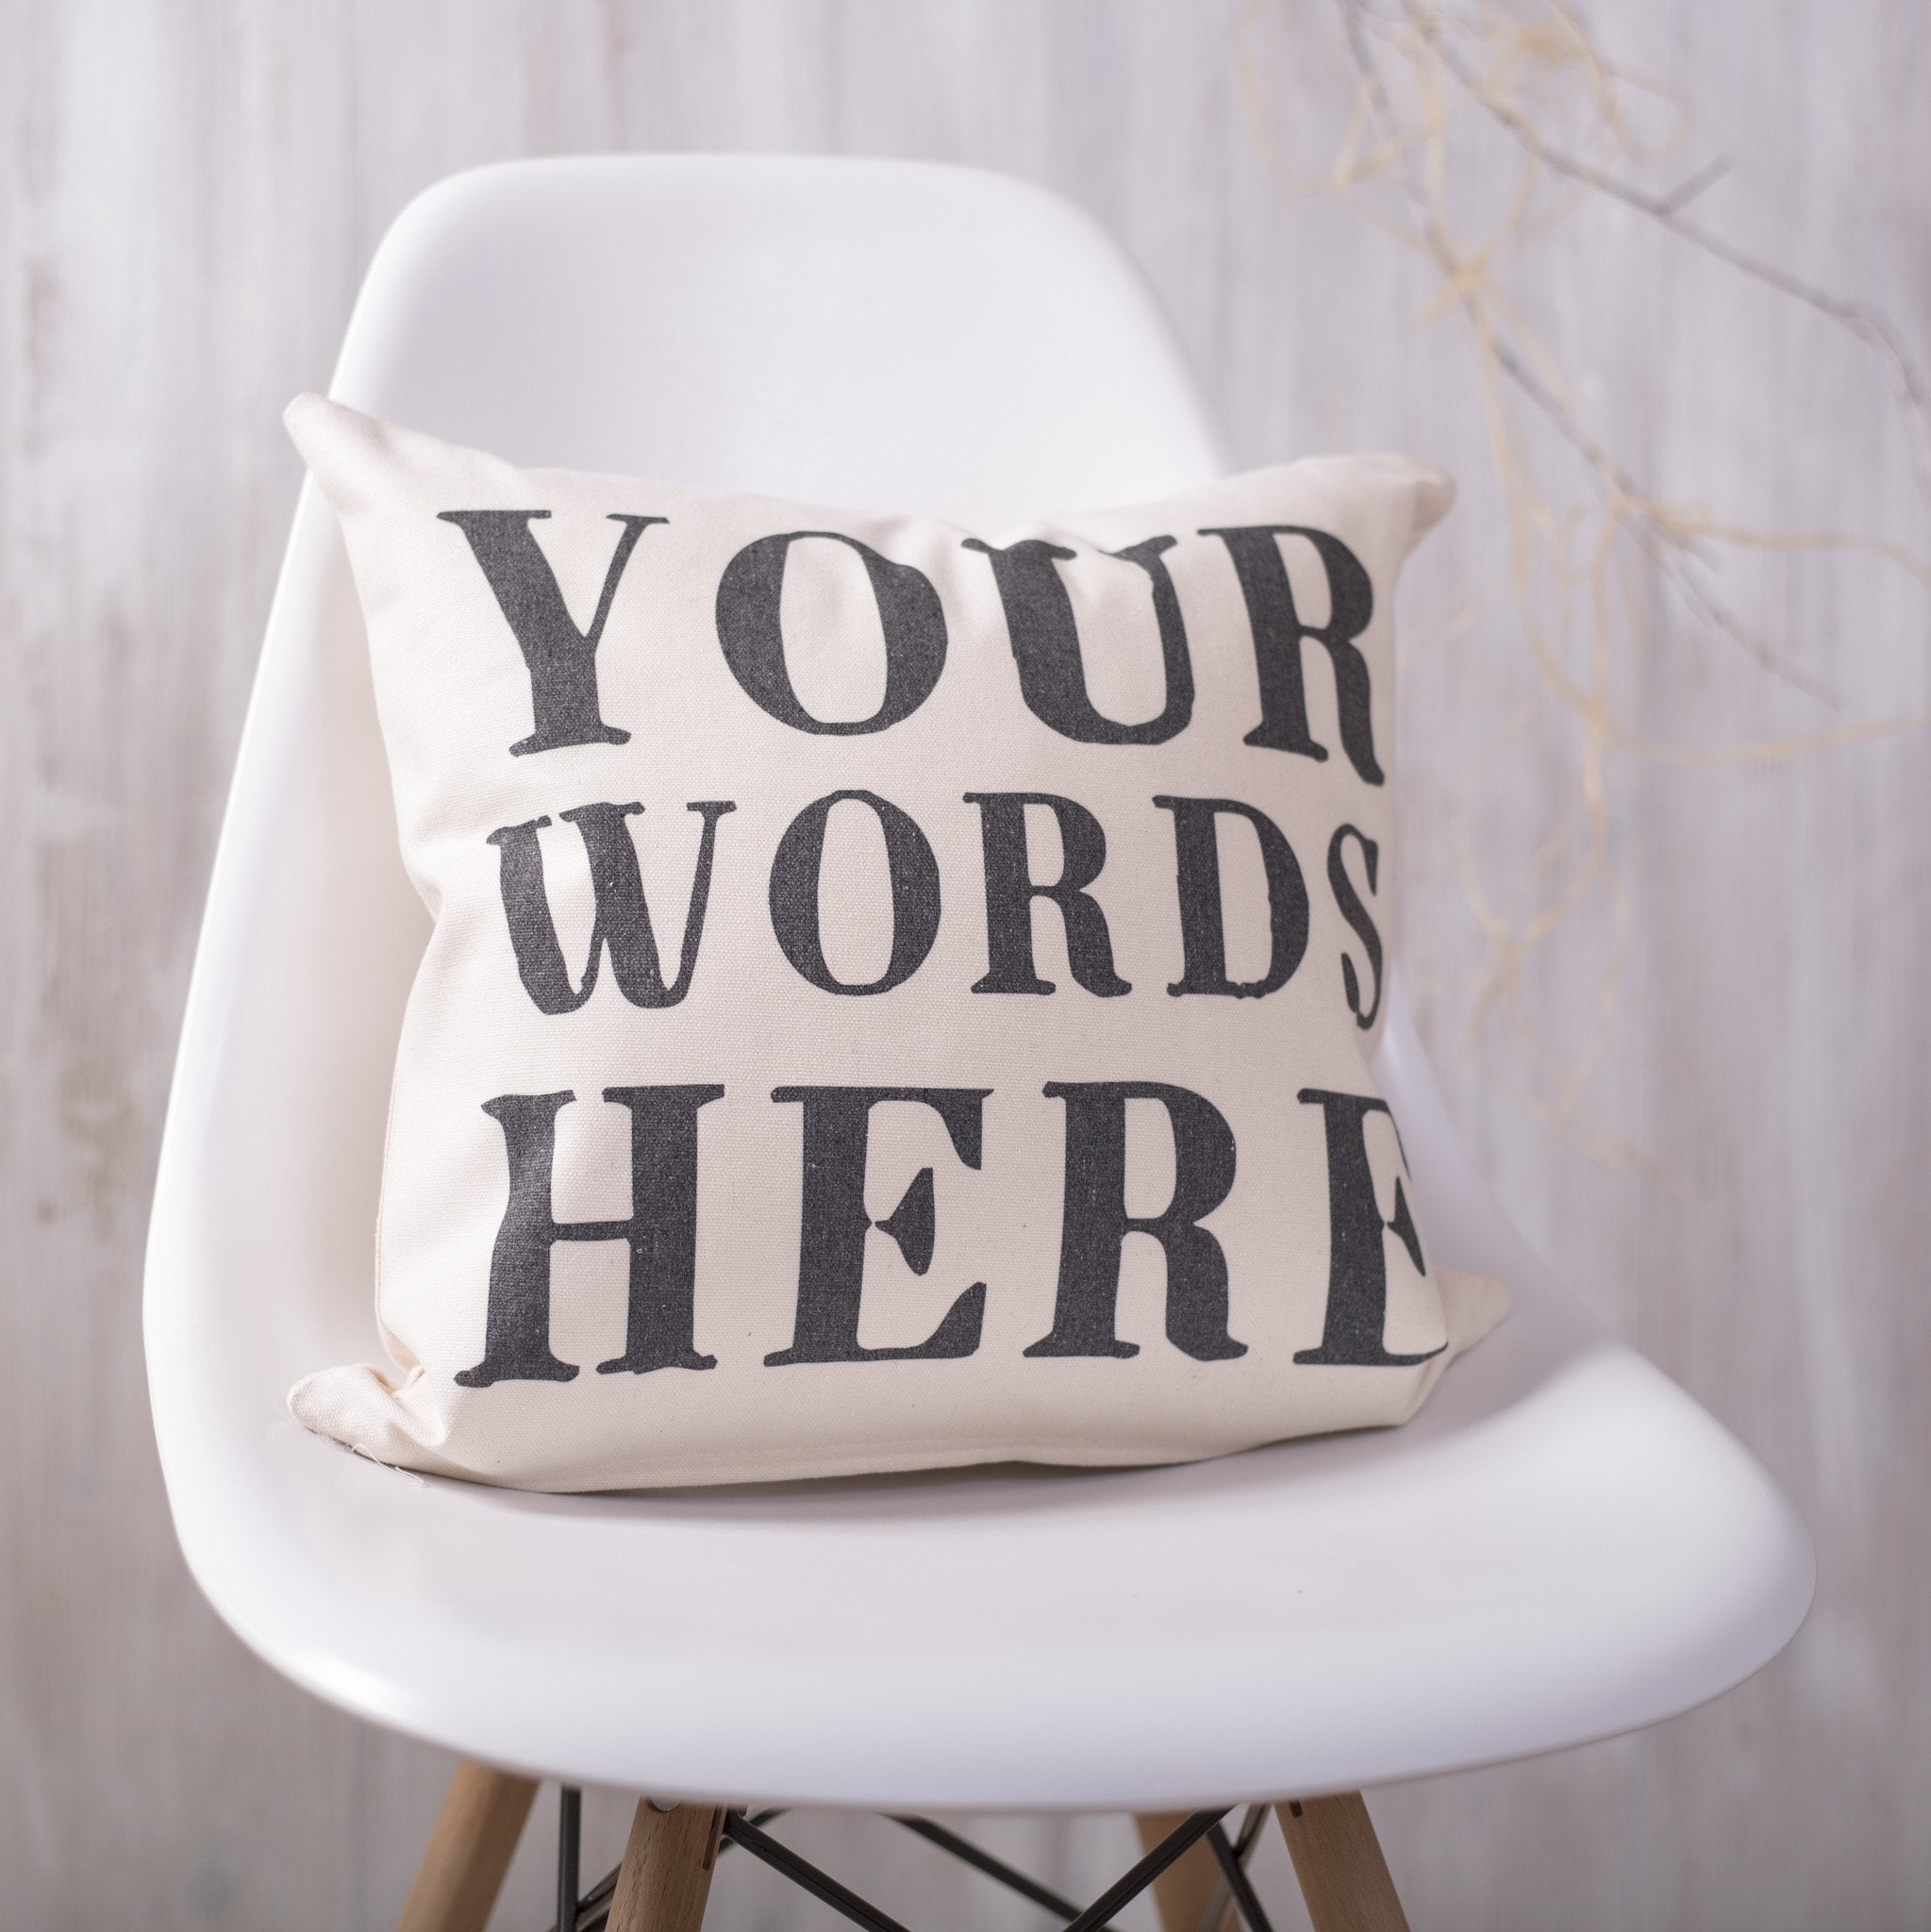 Personalised Quote Cushion - Oakdene Designs - 1